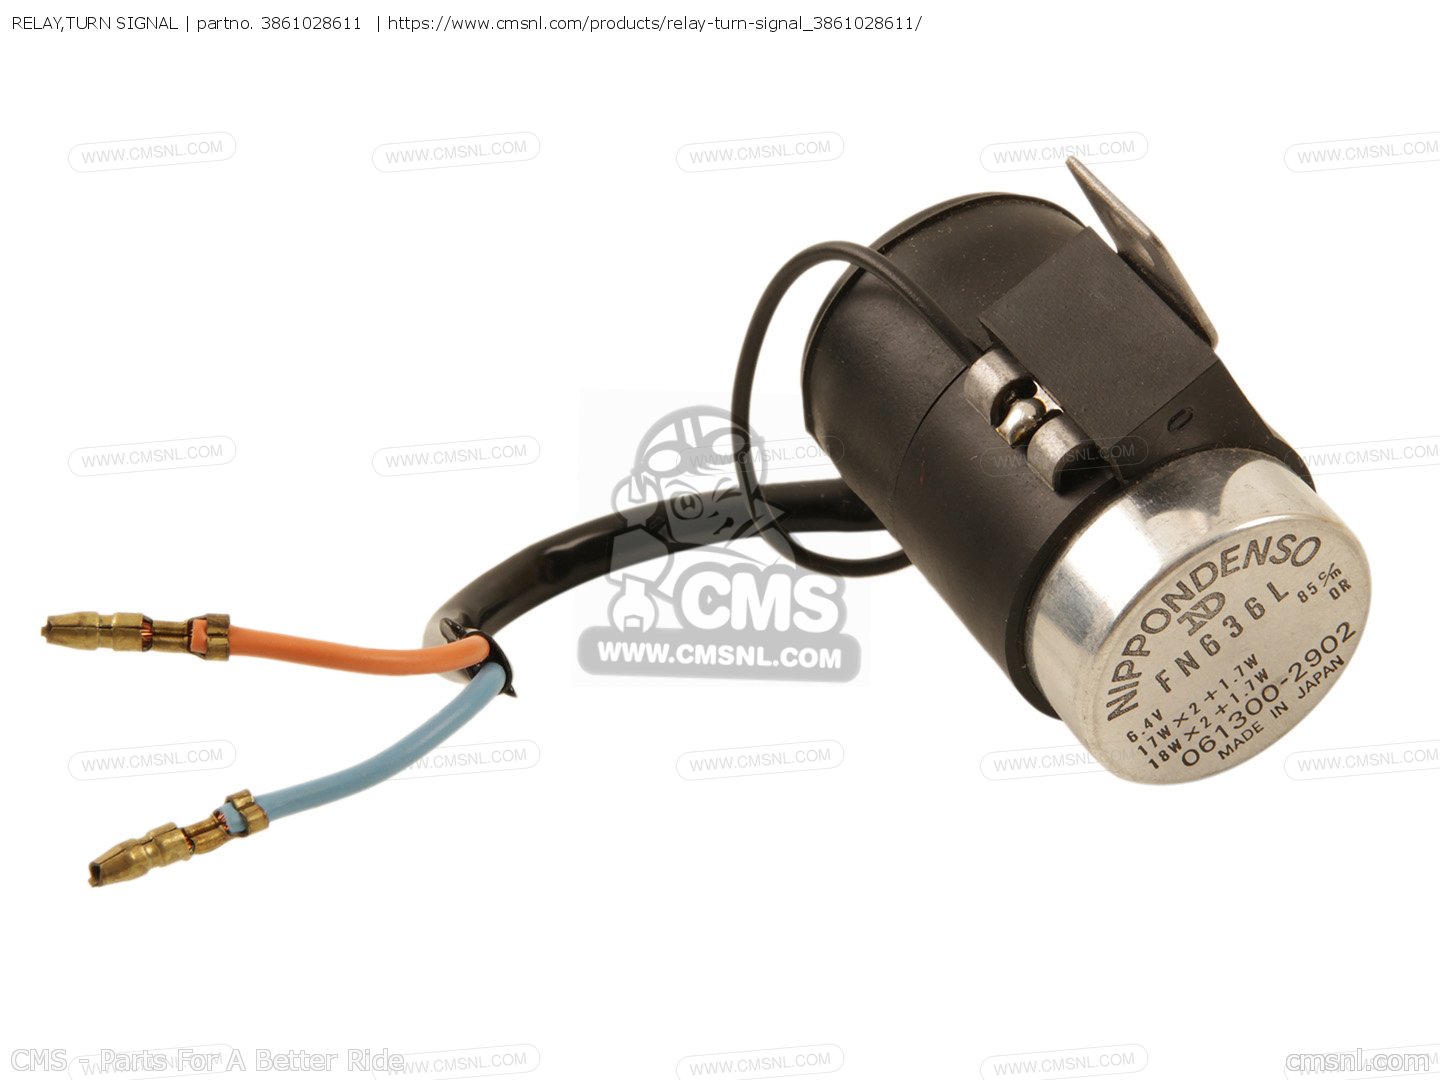 RELAY,TURN SIGNAL for TS185 1974 (L) USA (E03) - order at CMSNL